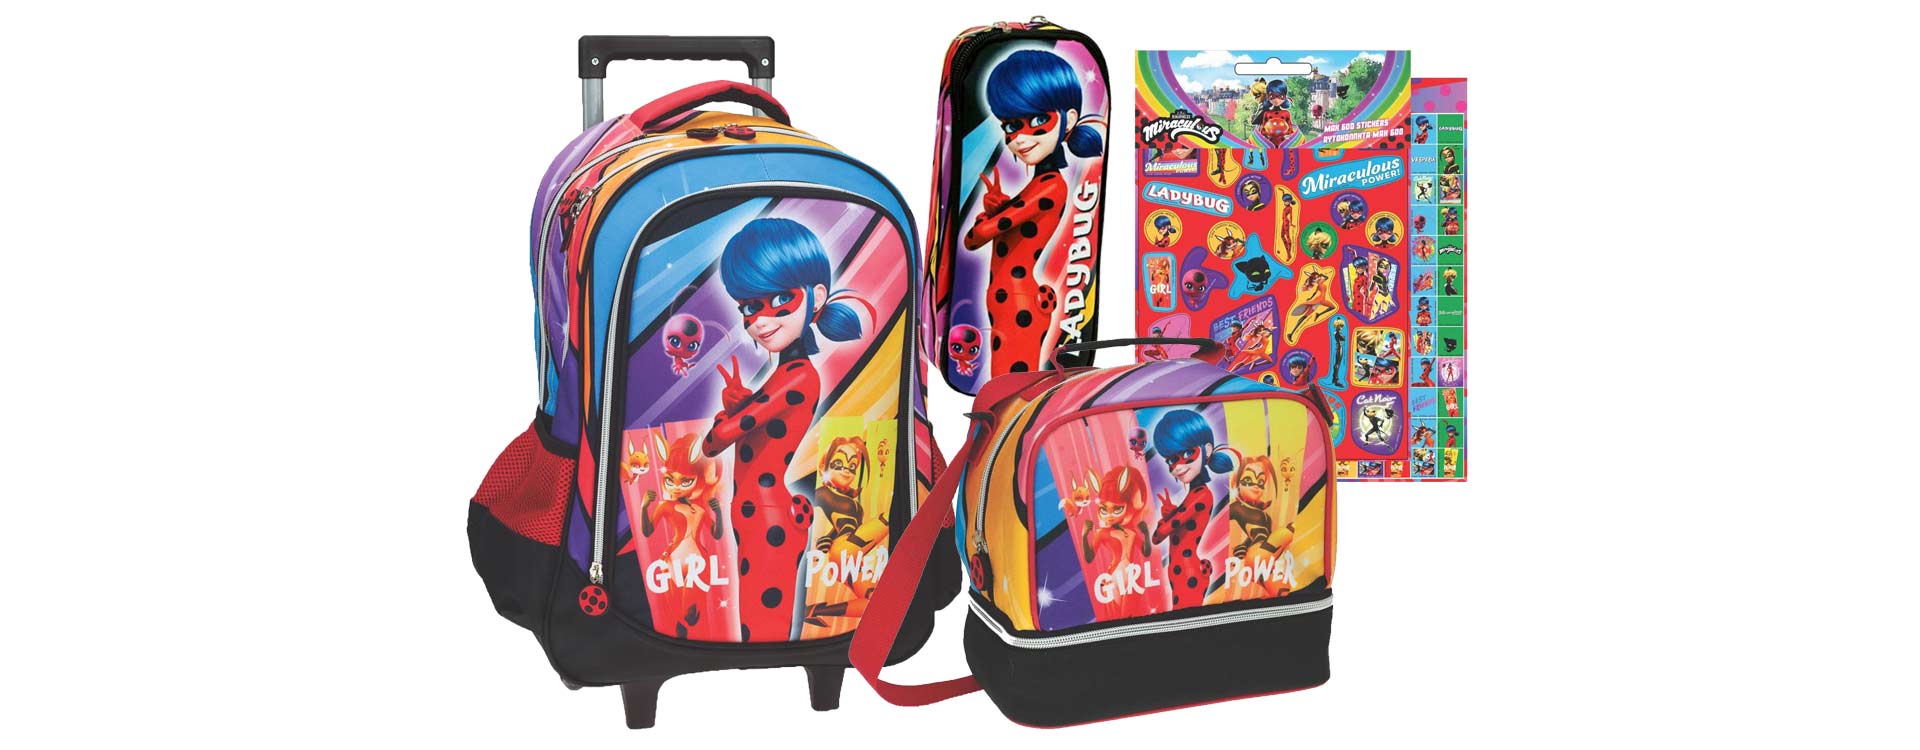 collection scolaire ladybug miraculous